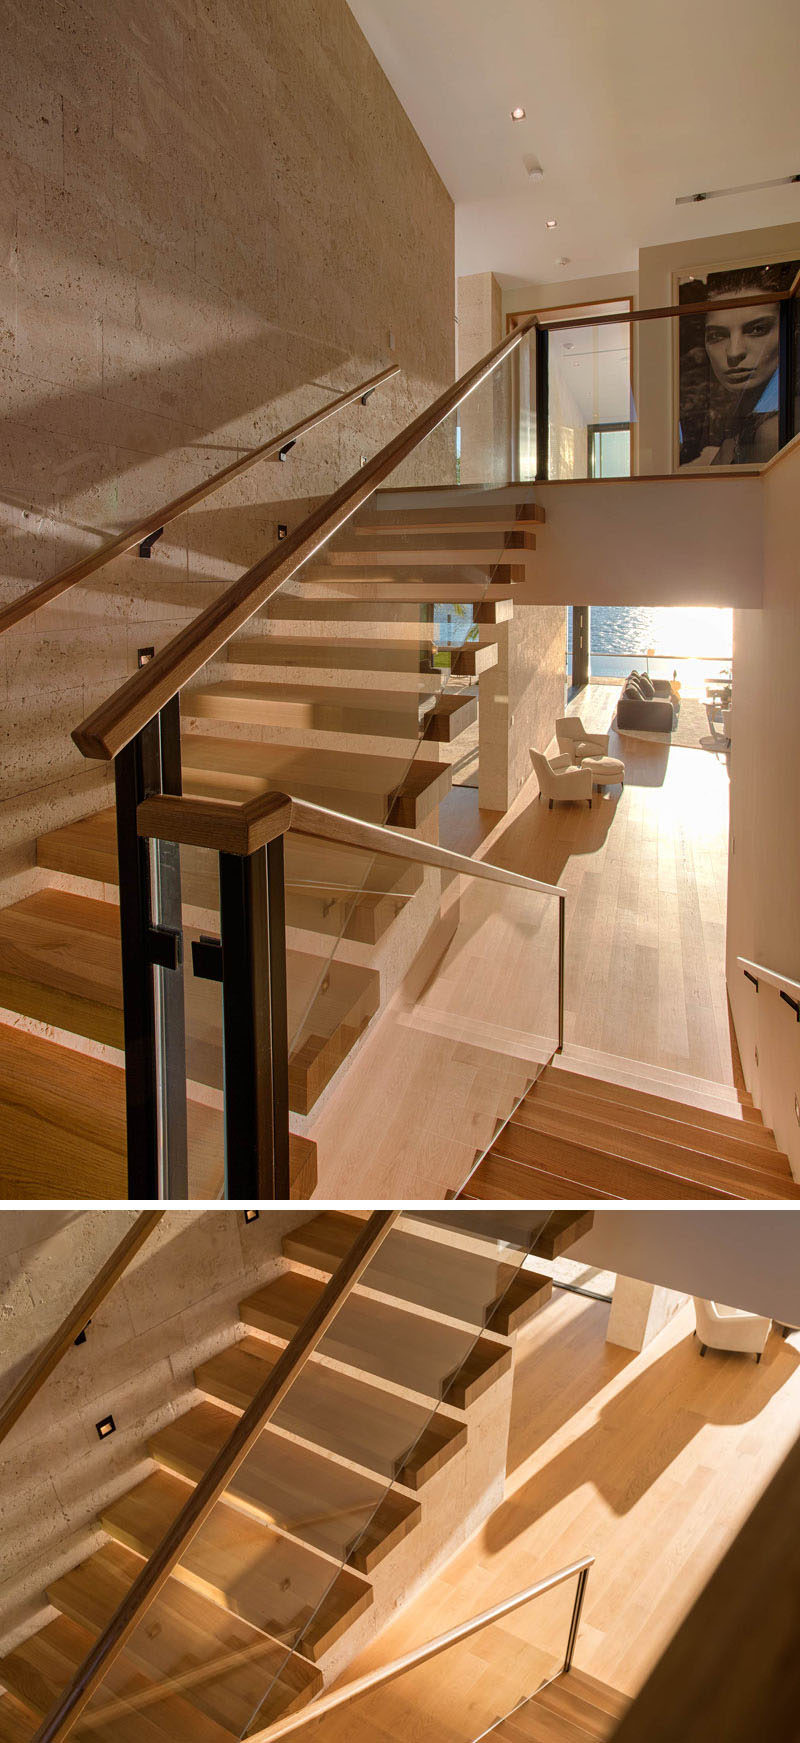 Light wood stairs with glass railings lead to the upper floor of this modern home.